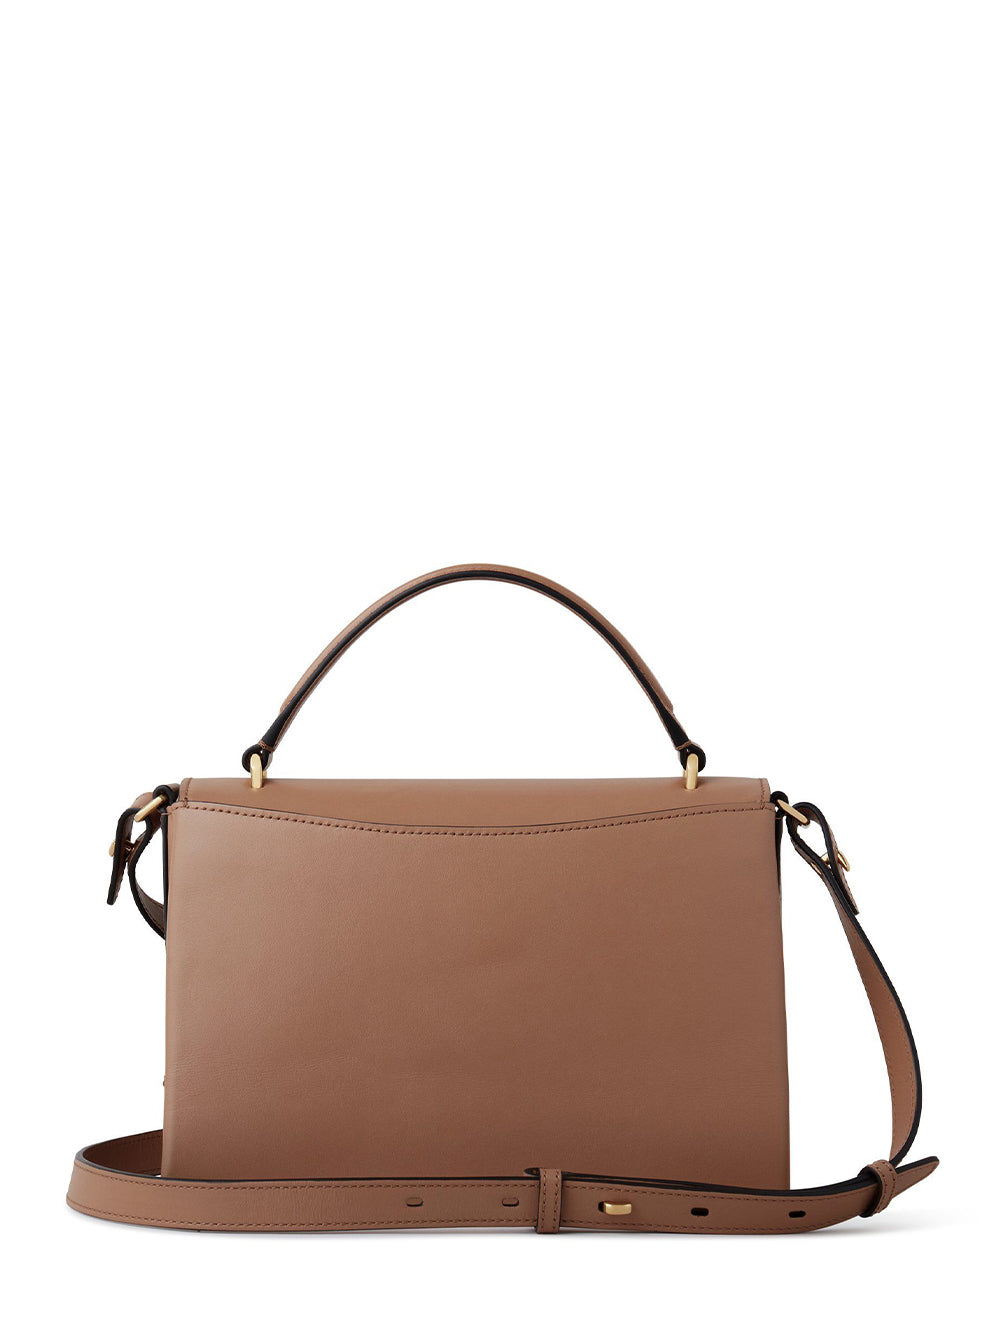 Mulberry-LanaTopHandle-SableHighGlossLeather-2